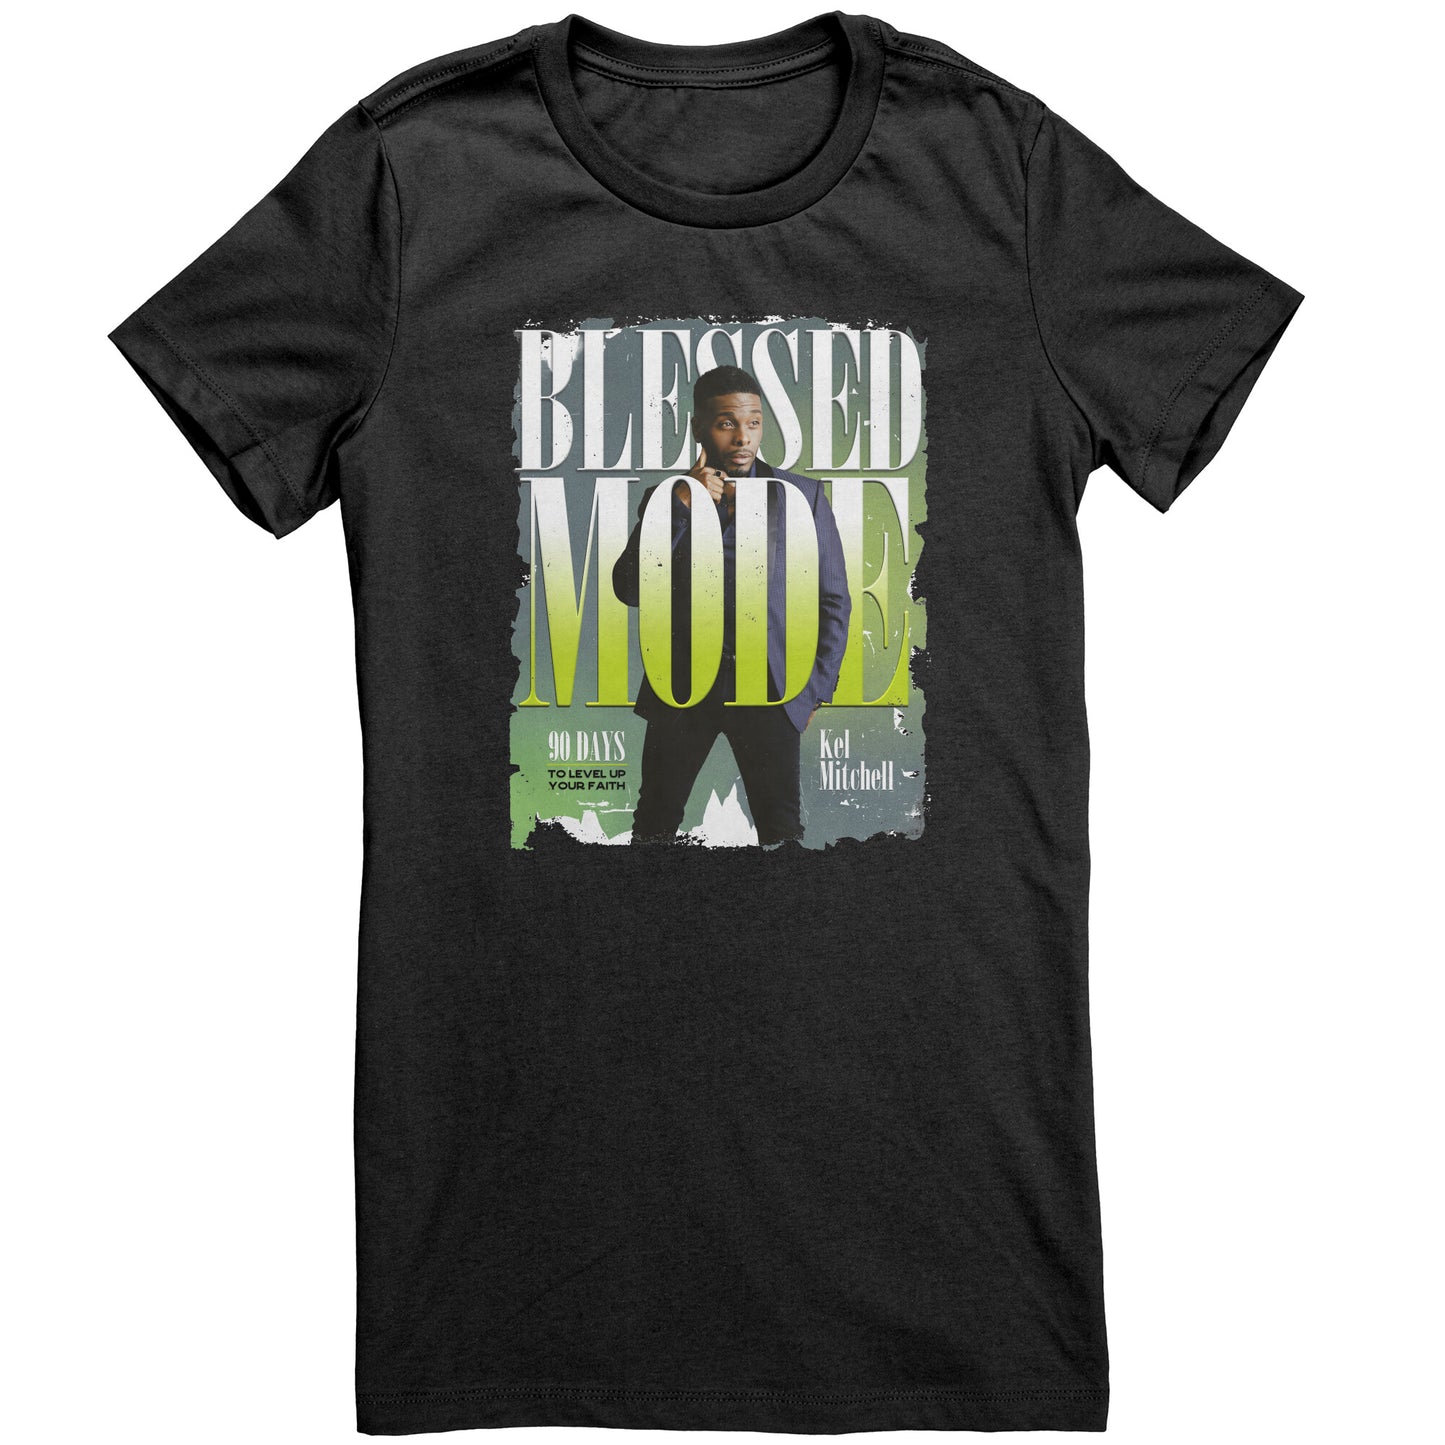 Blessed Mode t-shirt